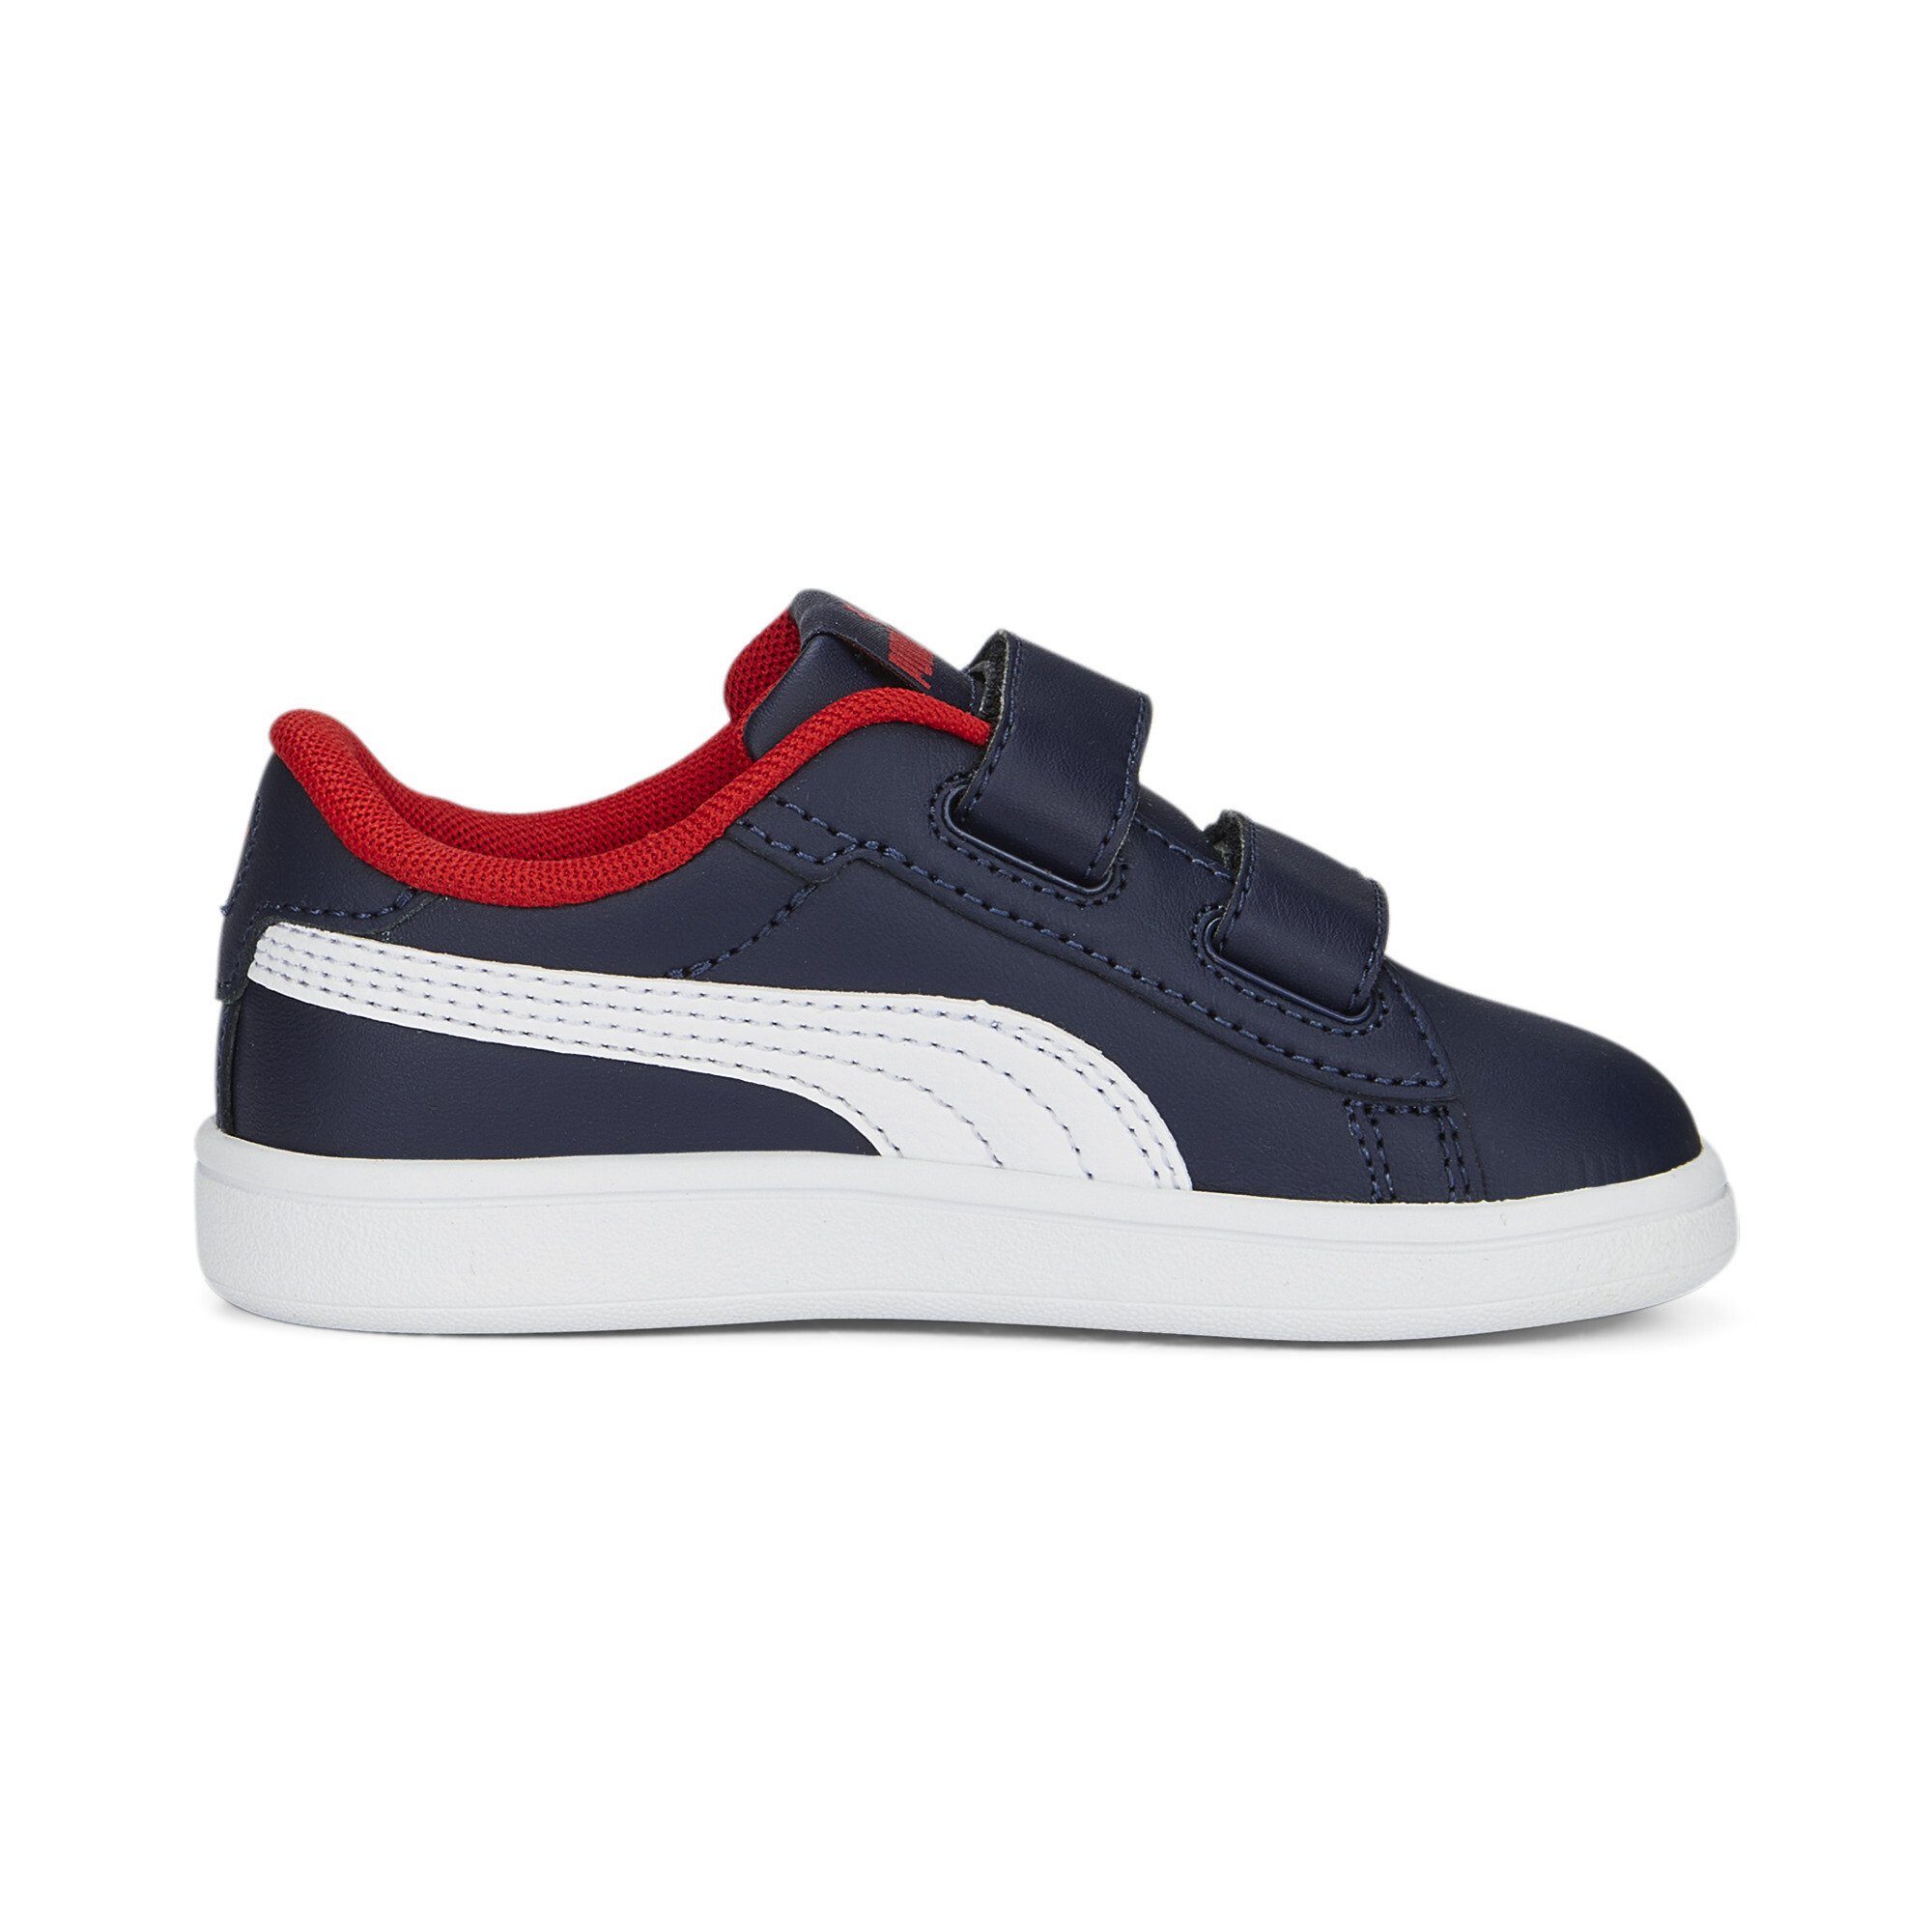 Sneakers Kinder Leather Red White All Sneaker PUMA 3.0 Blue V Navy For Smash Time